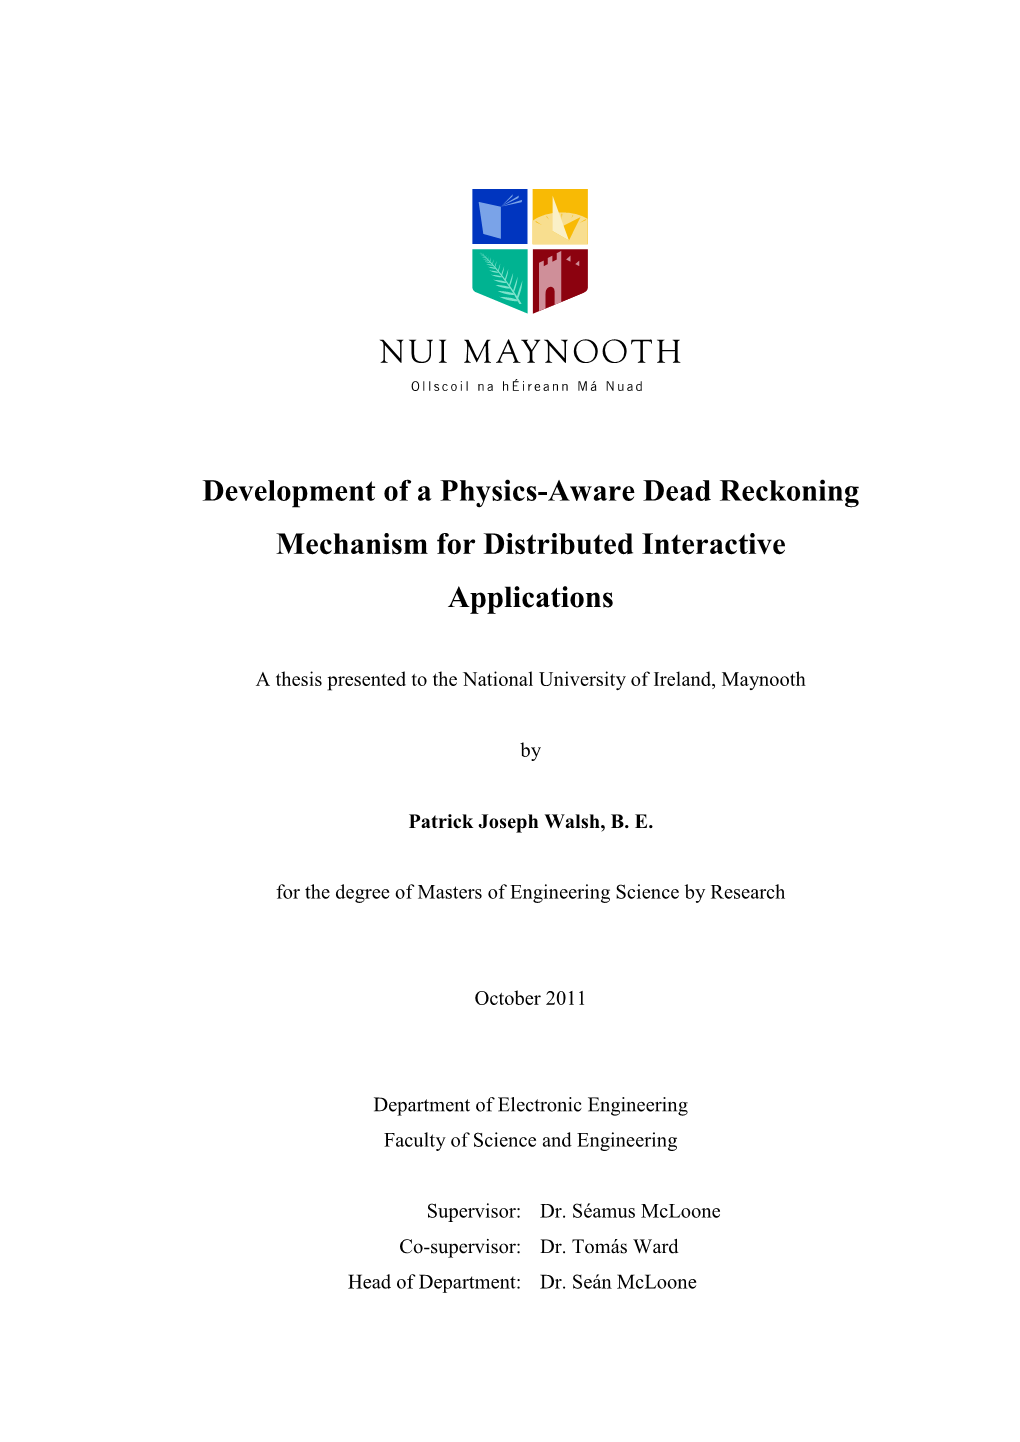 Development of a Physics-Aware Dead Reckoning Mechanism For